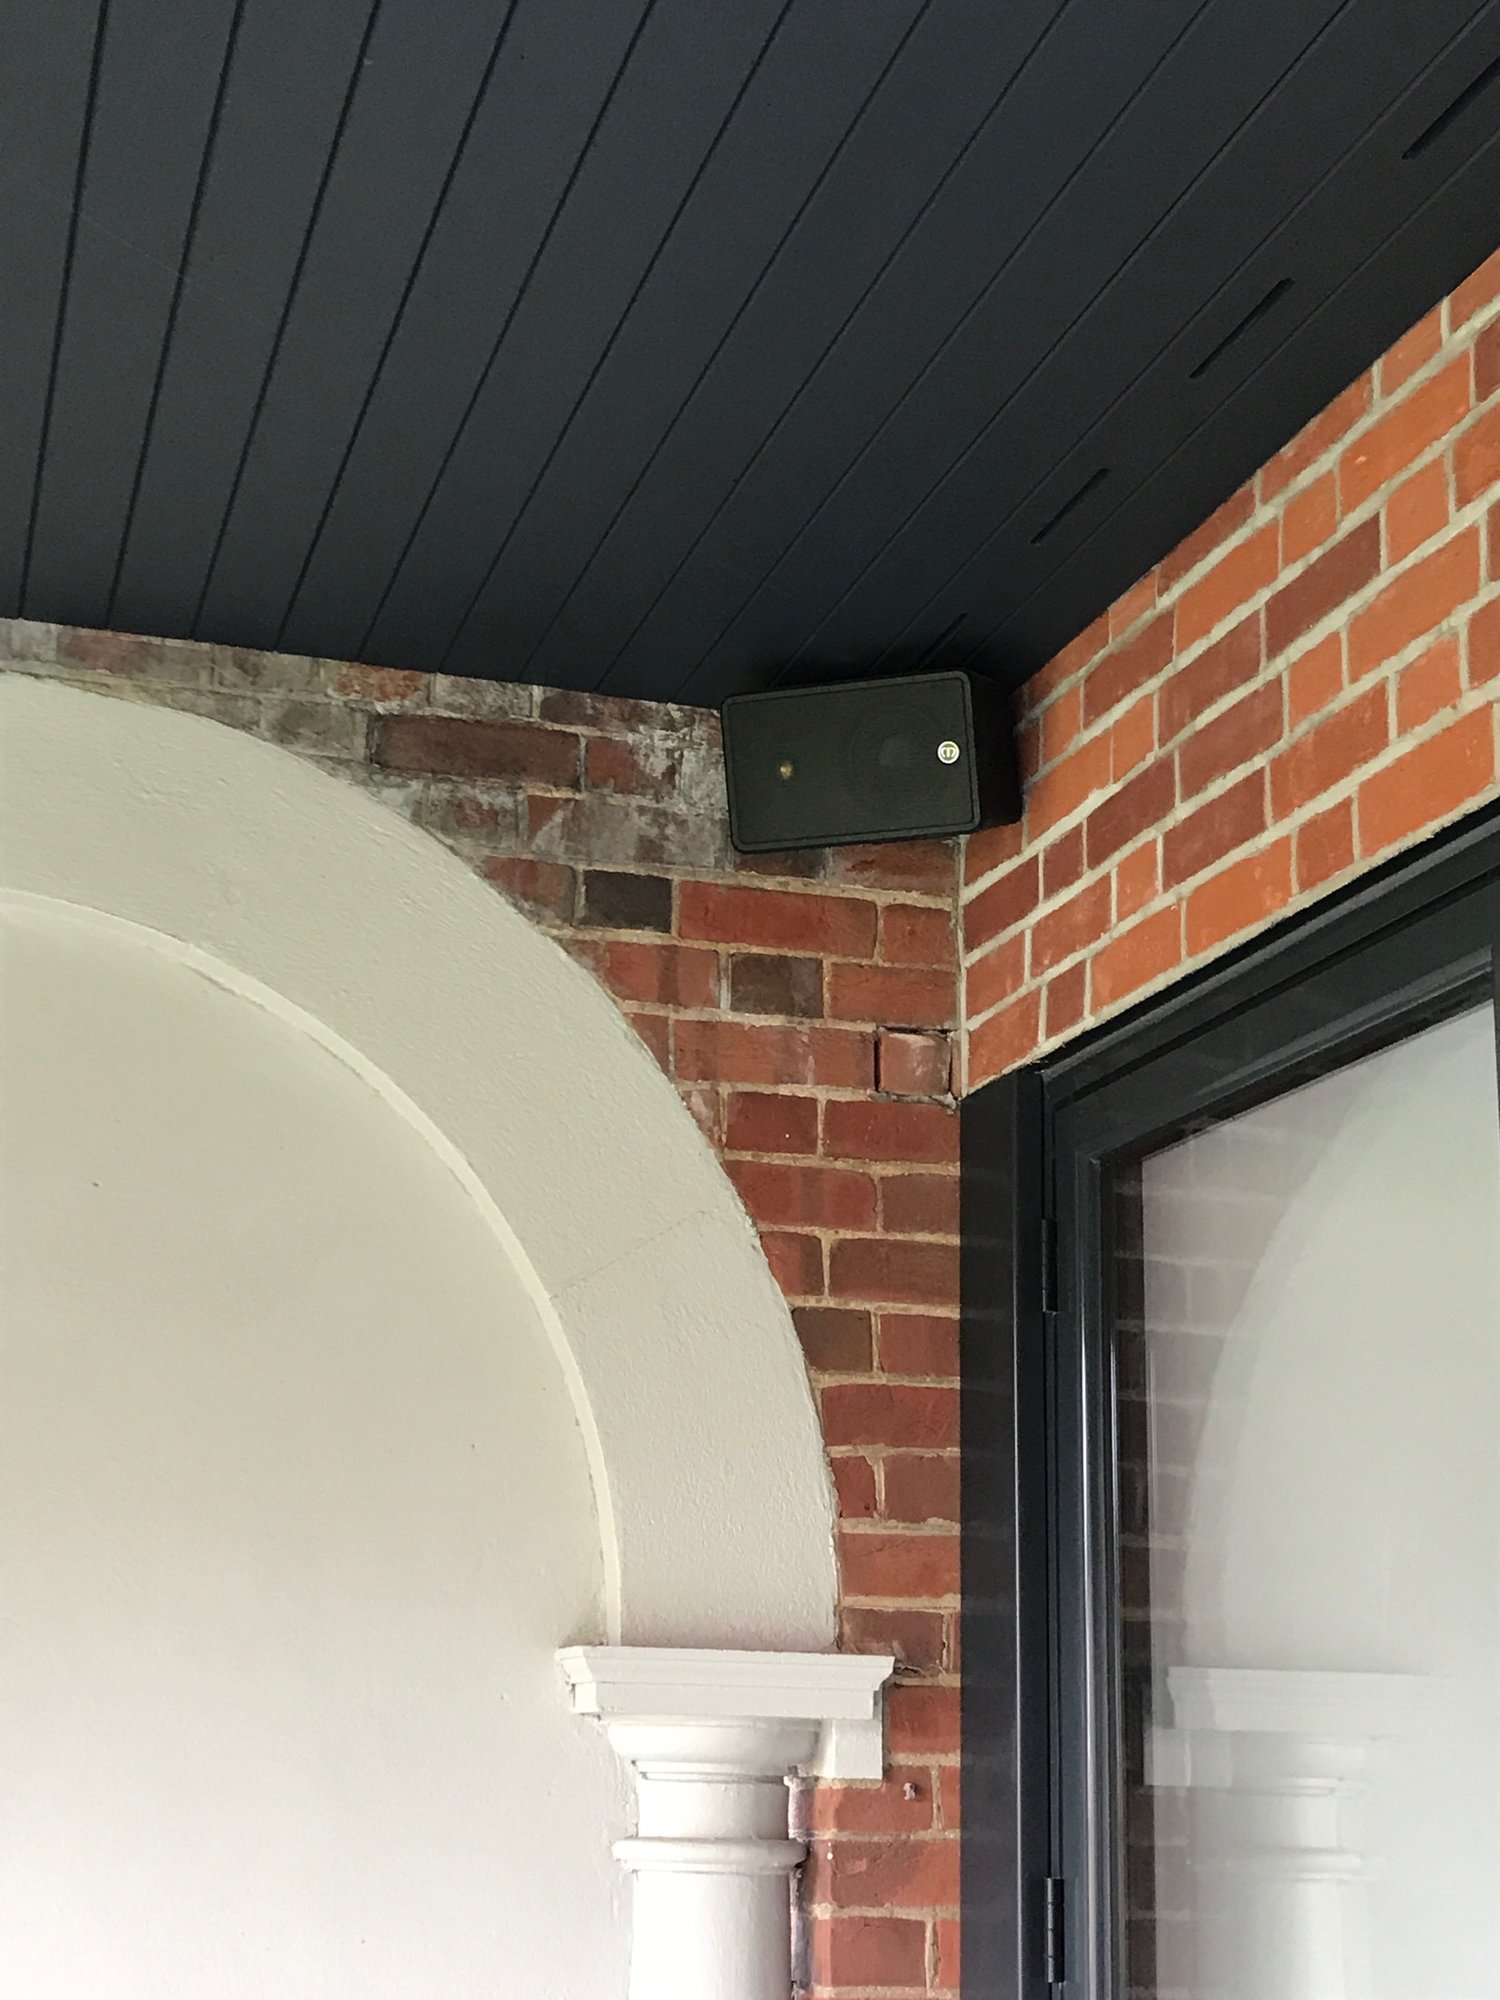 Close up of Monitor Audio speaker mounted to outside brick wall